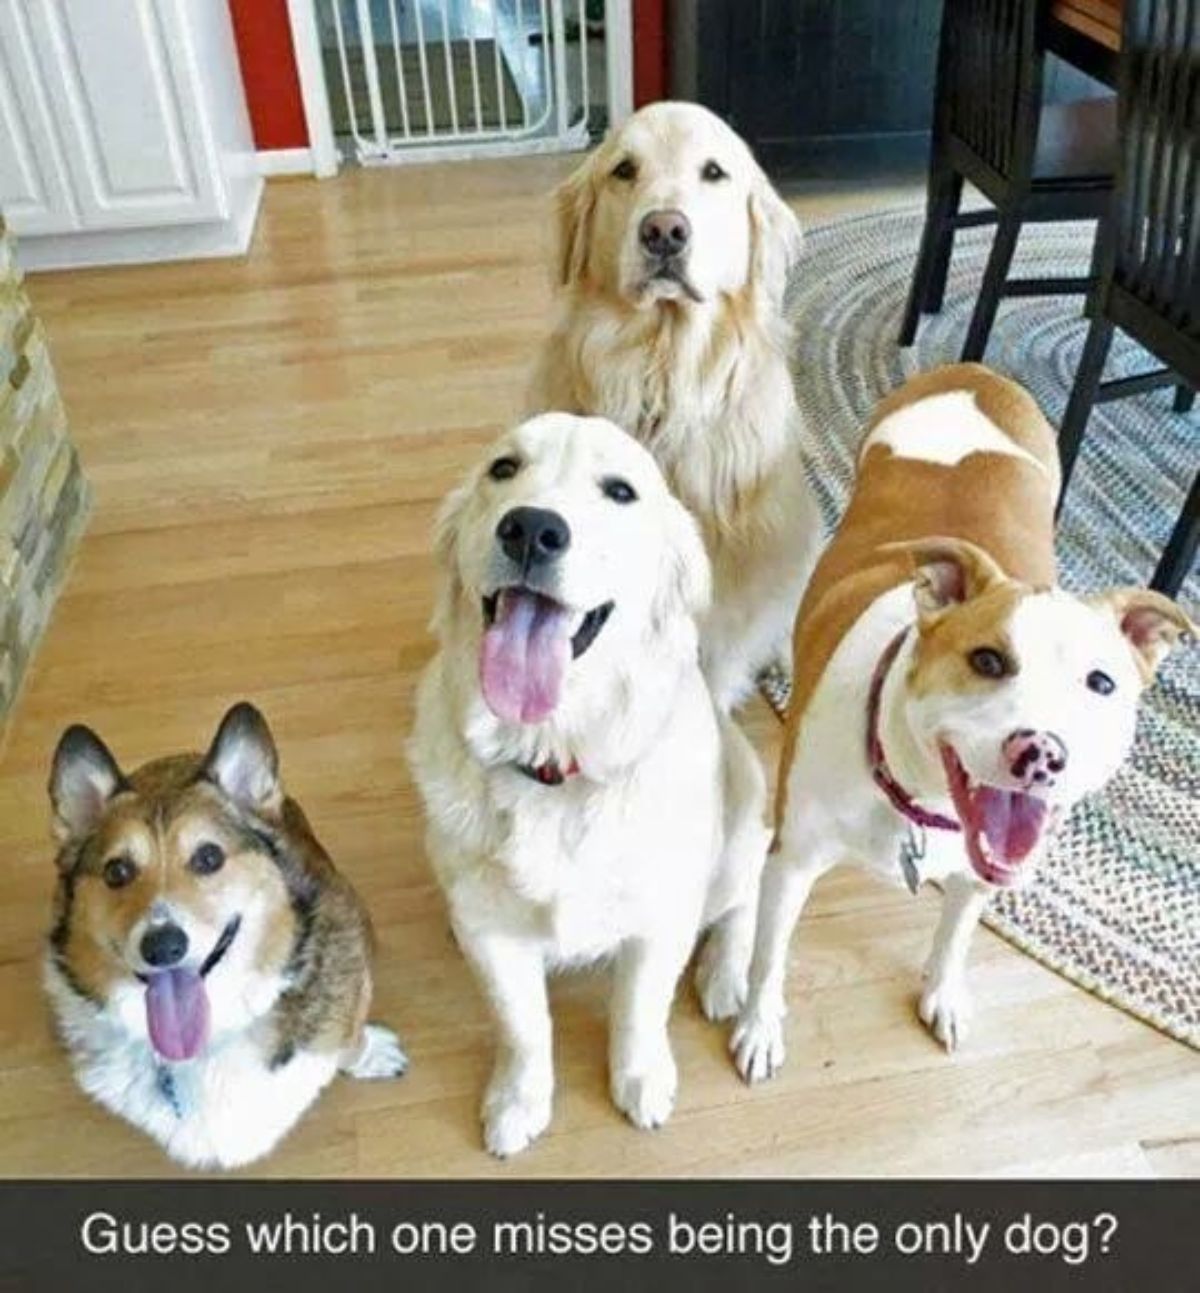 1 smiling corgi, 1 smiling golden retriever and 1 smiling brown and white pitbull and 1 unhappy golden retriever behind them